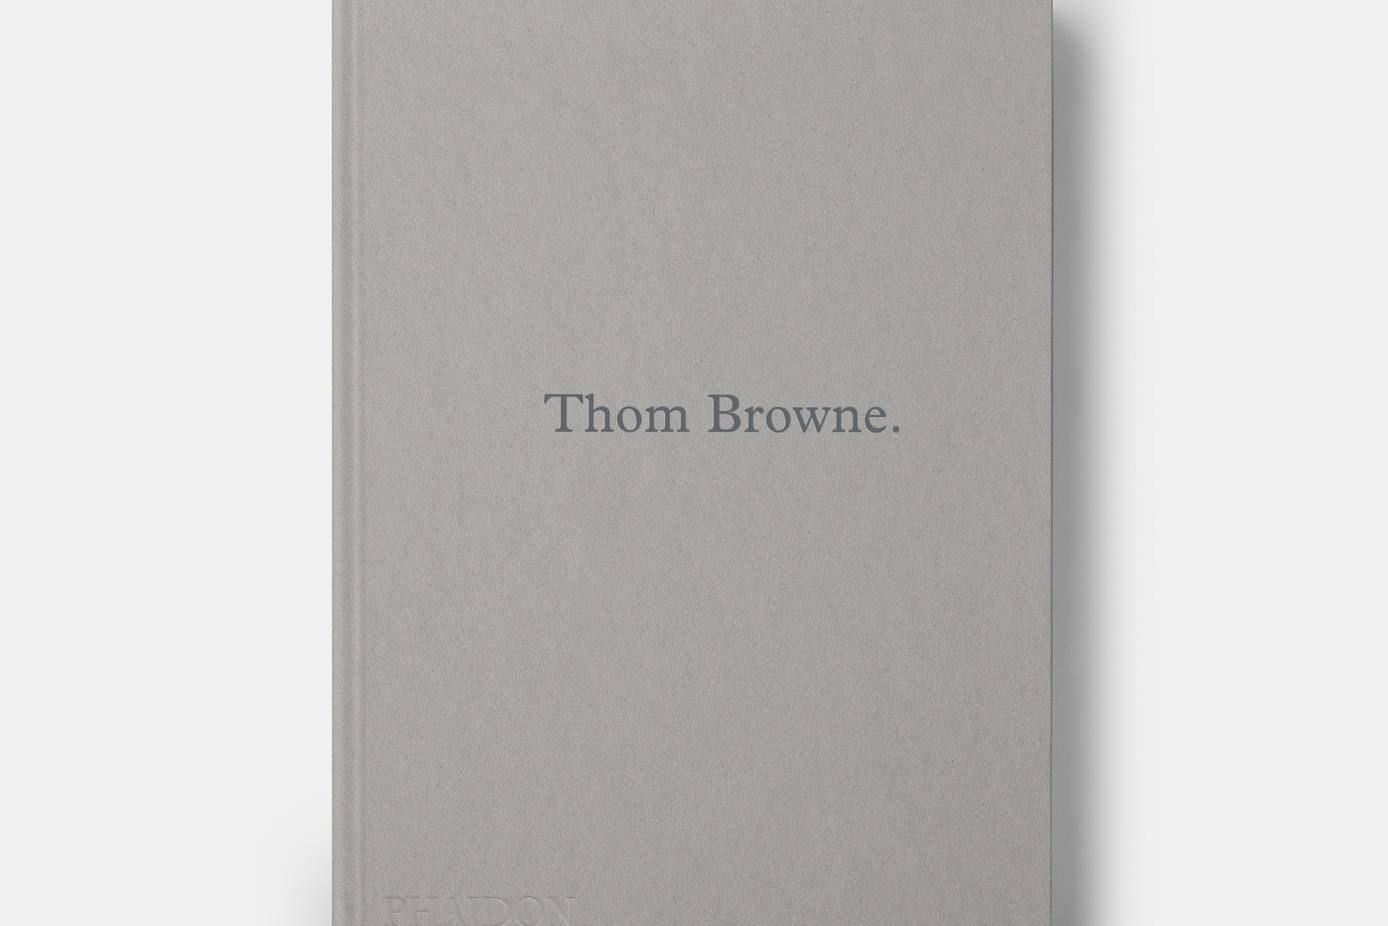 In Pictures: Thom Browne to release book marking brand's 20th 